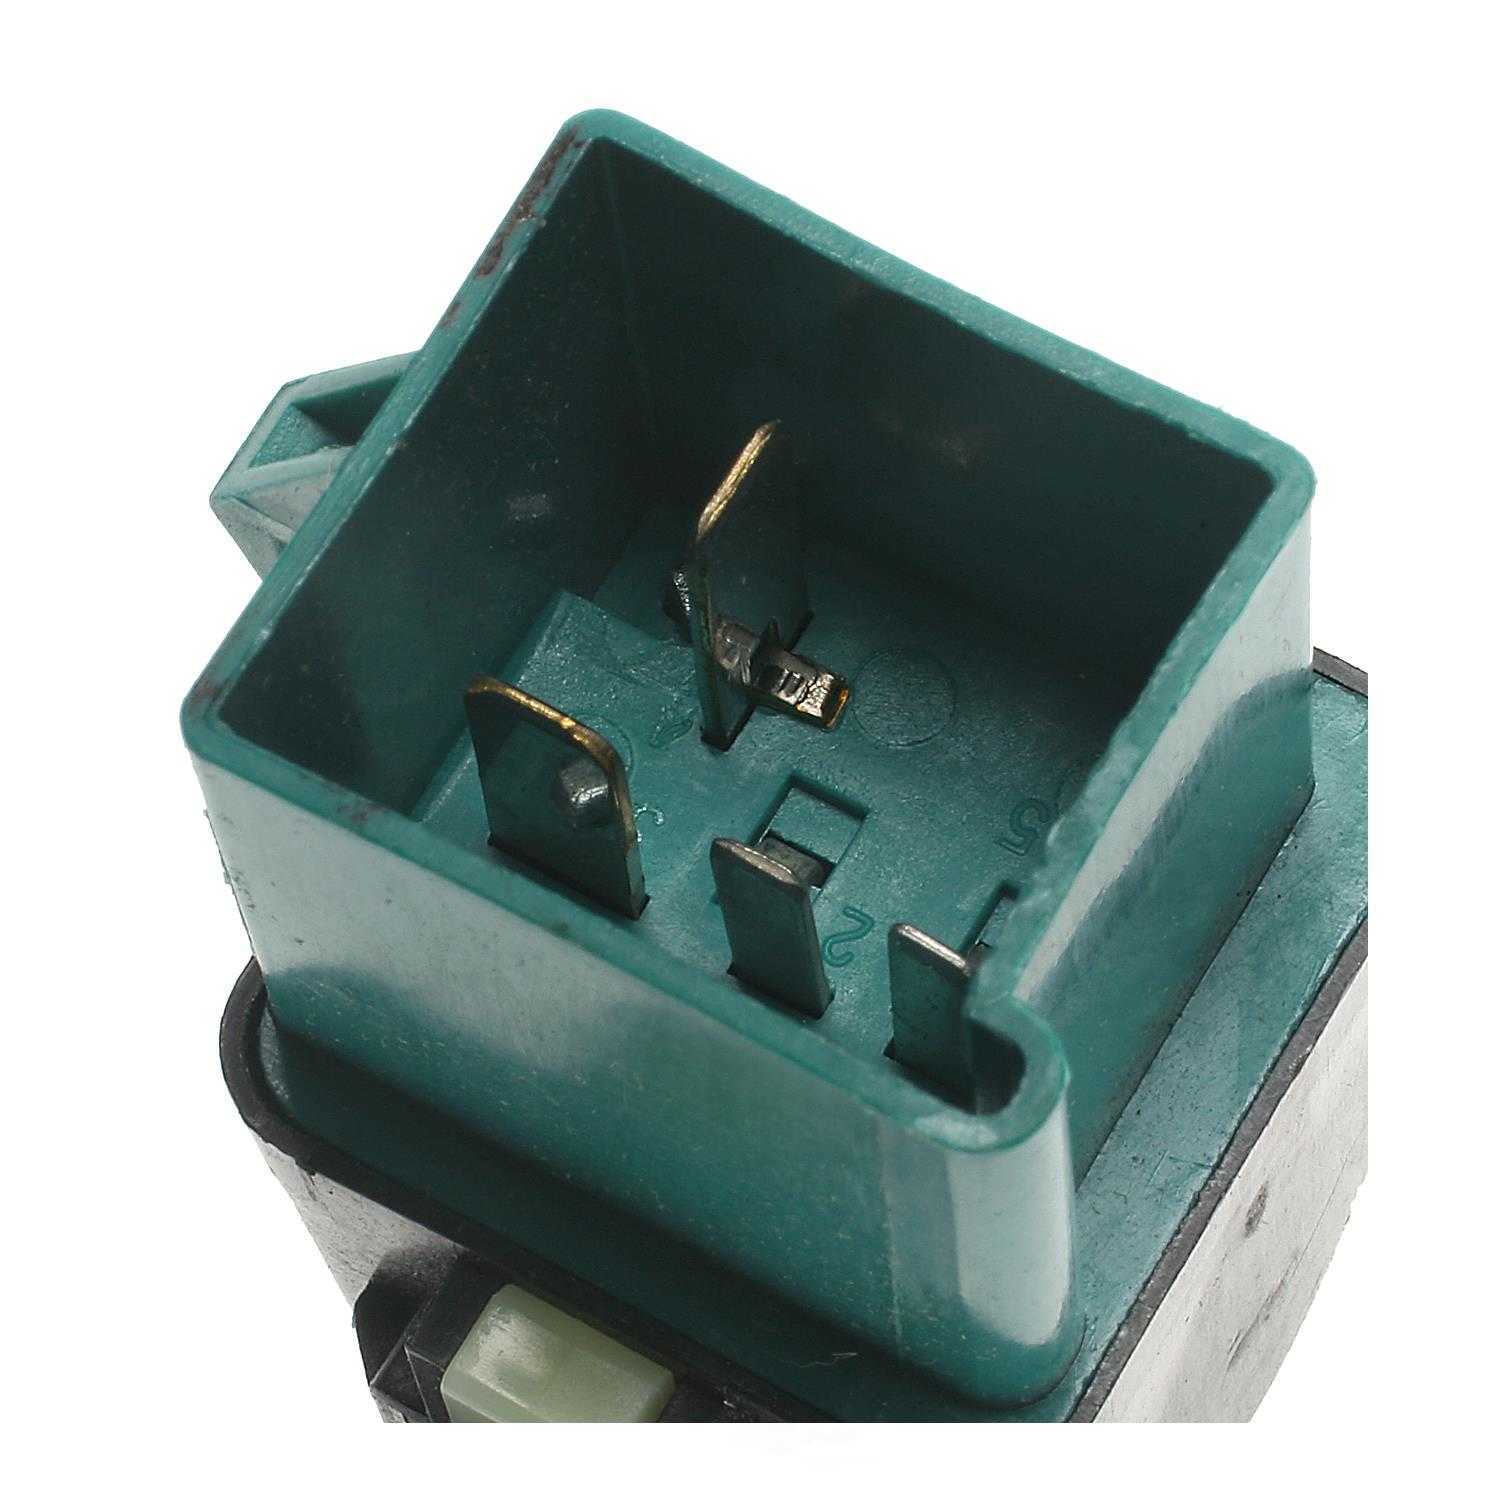 STANDARD MOTOR PRODUCTS - Fuel Pump Relay - STA RY-610